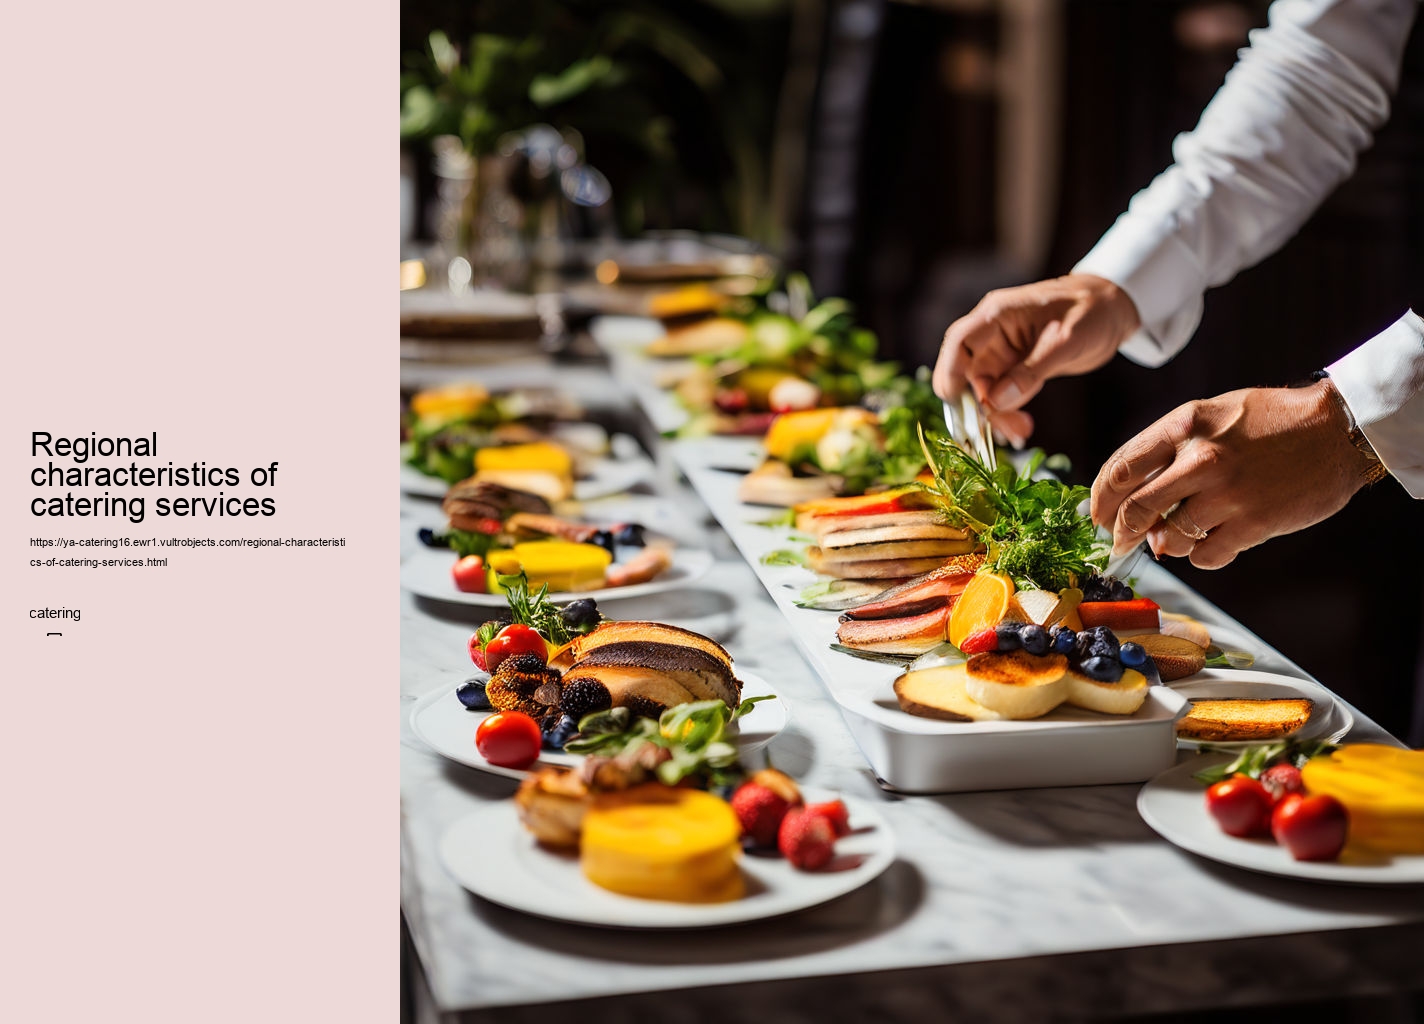 Regional characteristics of catering services